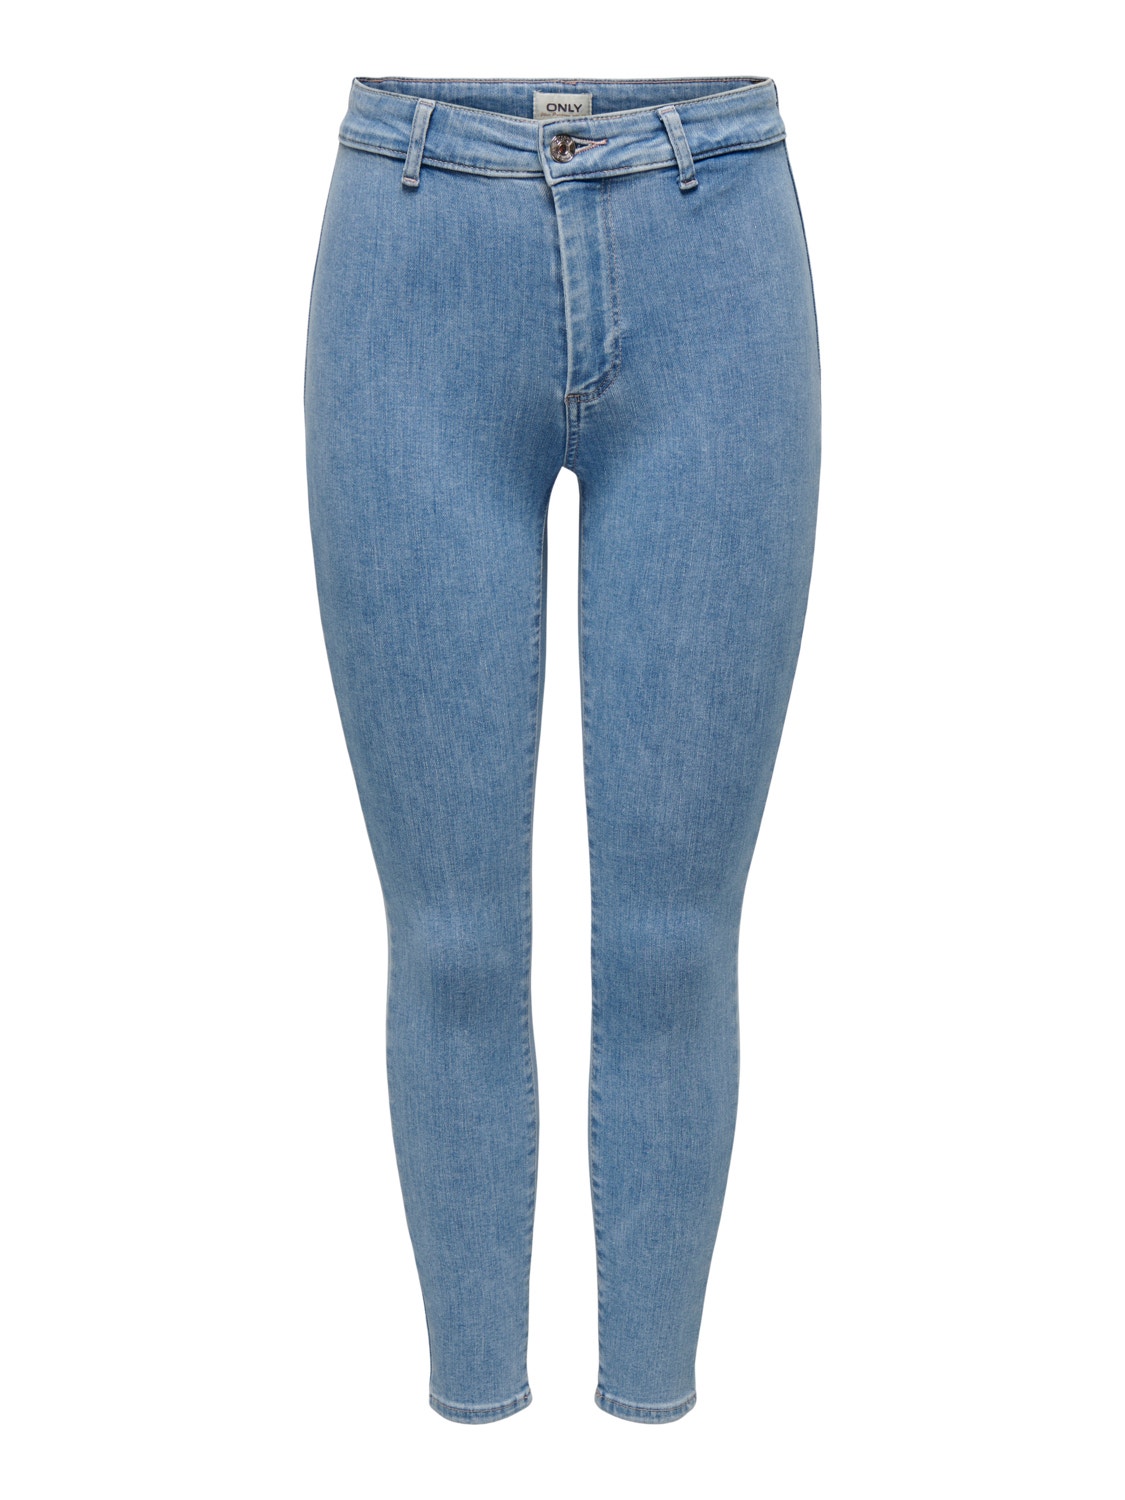 ONLY Skinny Fit Hohe Taille Jeans -Light Blue Denim - 15259336